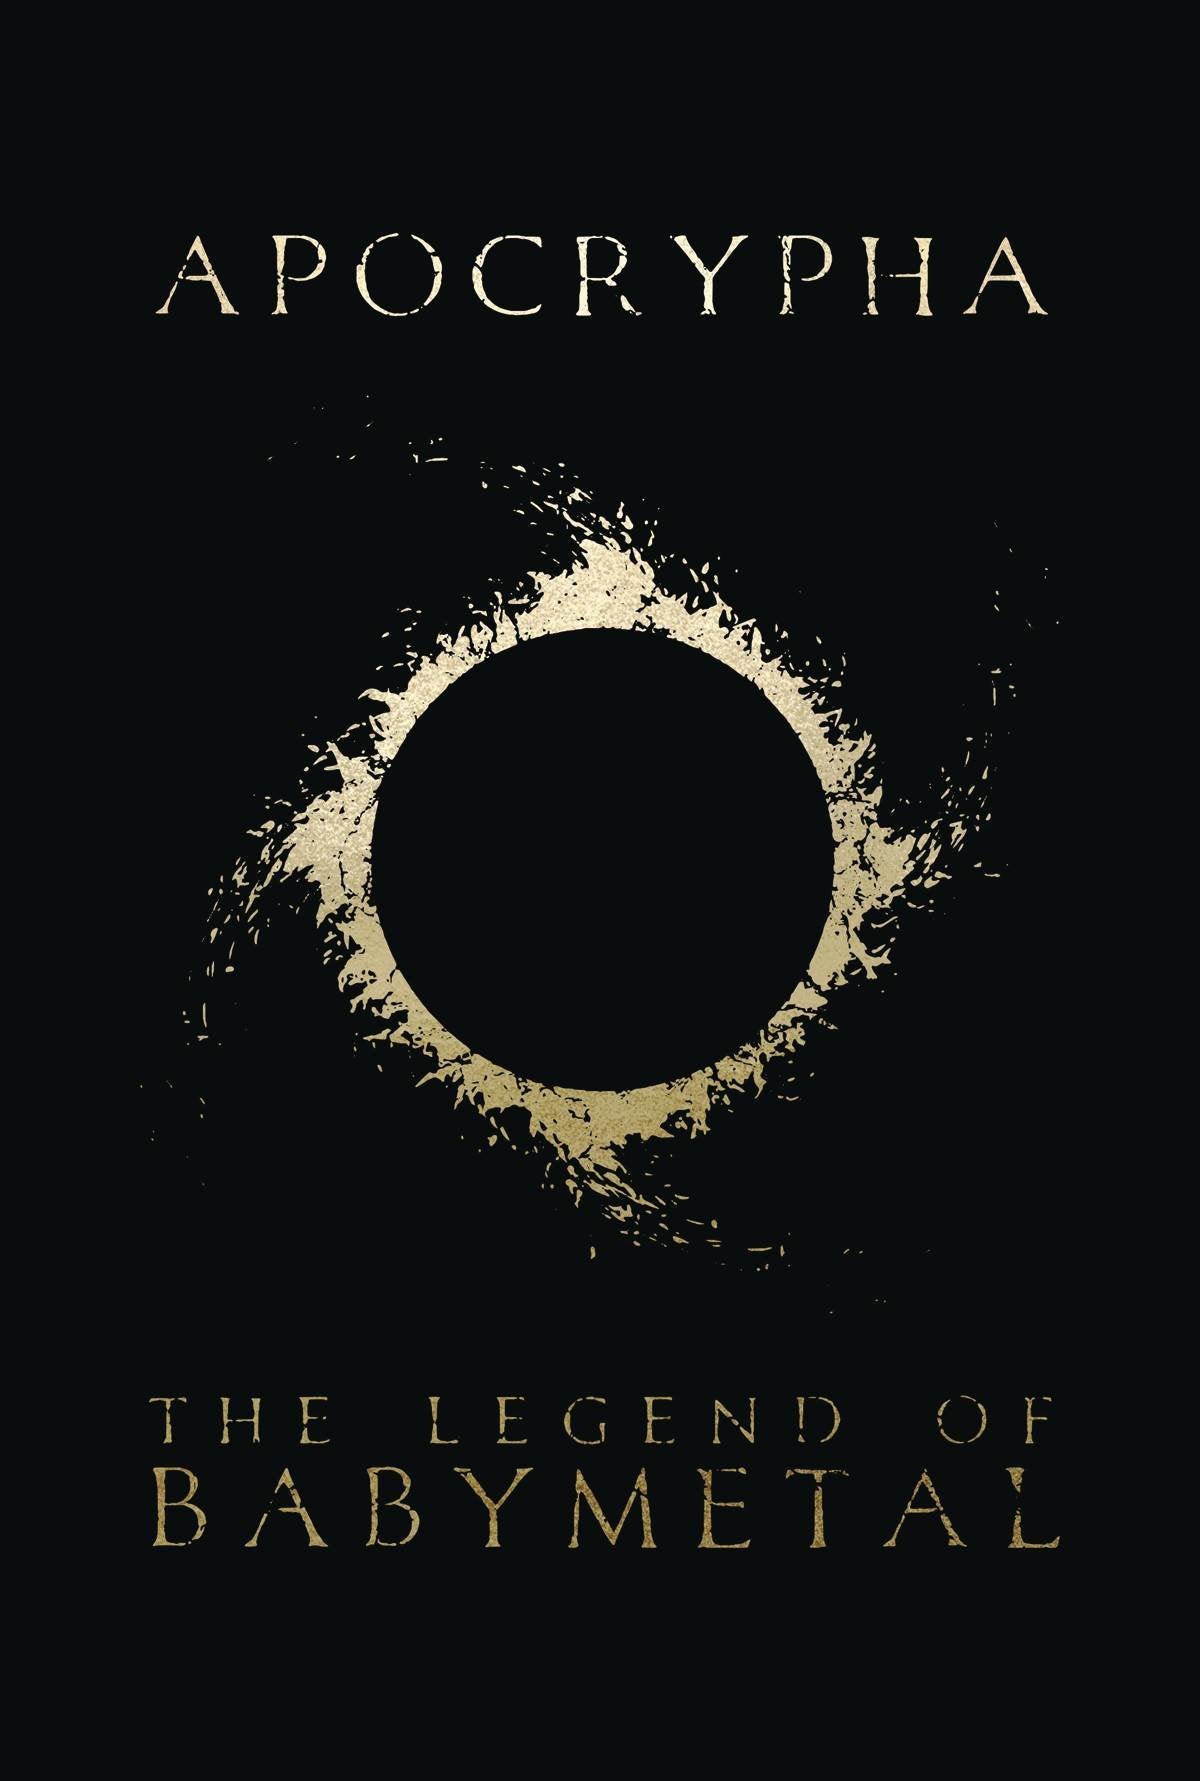 Apocrypha The Legend Of Babymetal Softcover